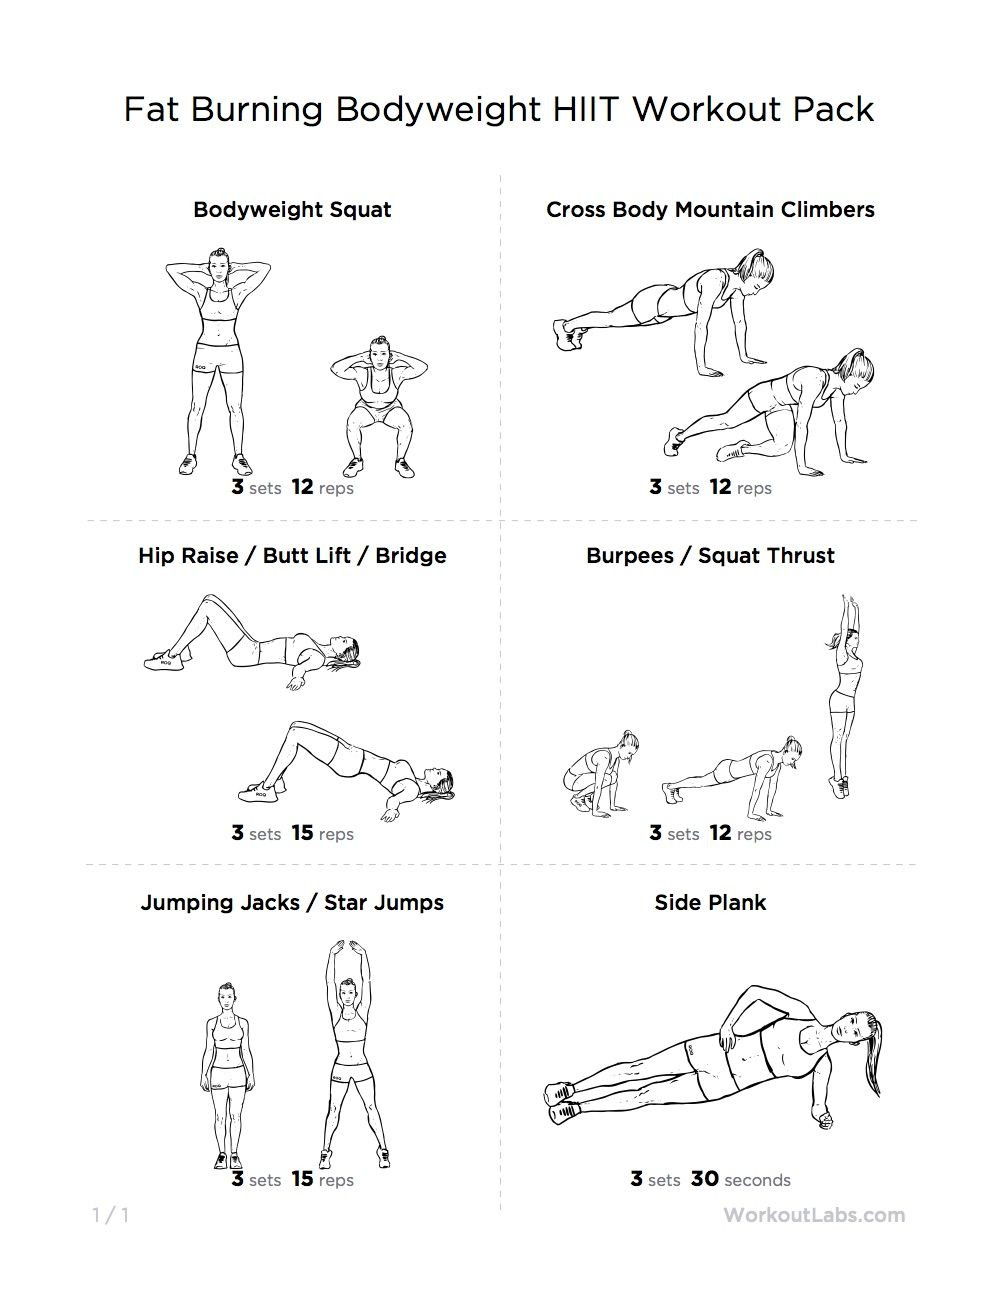 Fat Burning Workout For Men Full Body
 Pin on Fitness & Health